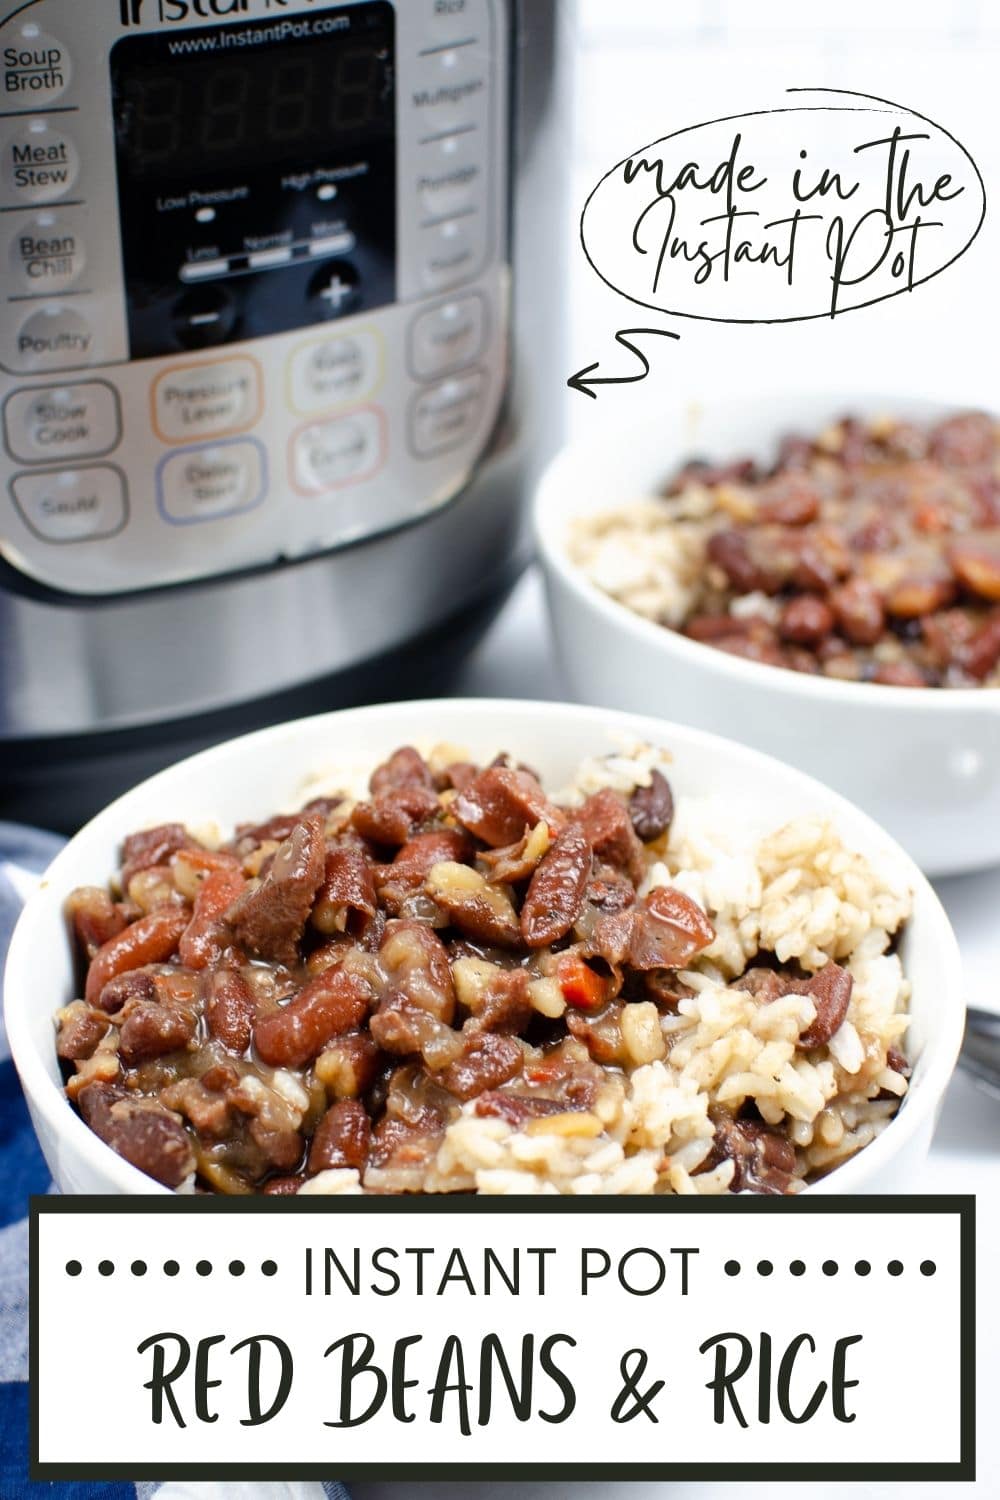 If you want an inexpensive healthy meal, you should try Instant Pot Red Beans and Rice. It's full of protein, fiber, vitamins & antioxidants. #instantpot #pressurecooker #redbeansandrice #healthyeating via @wondermomwannab